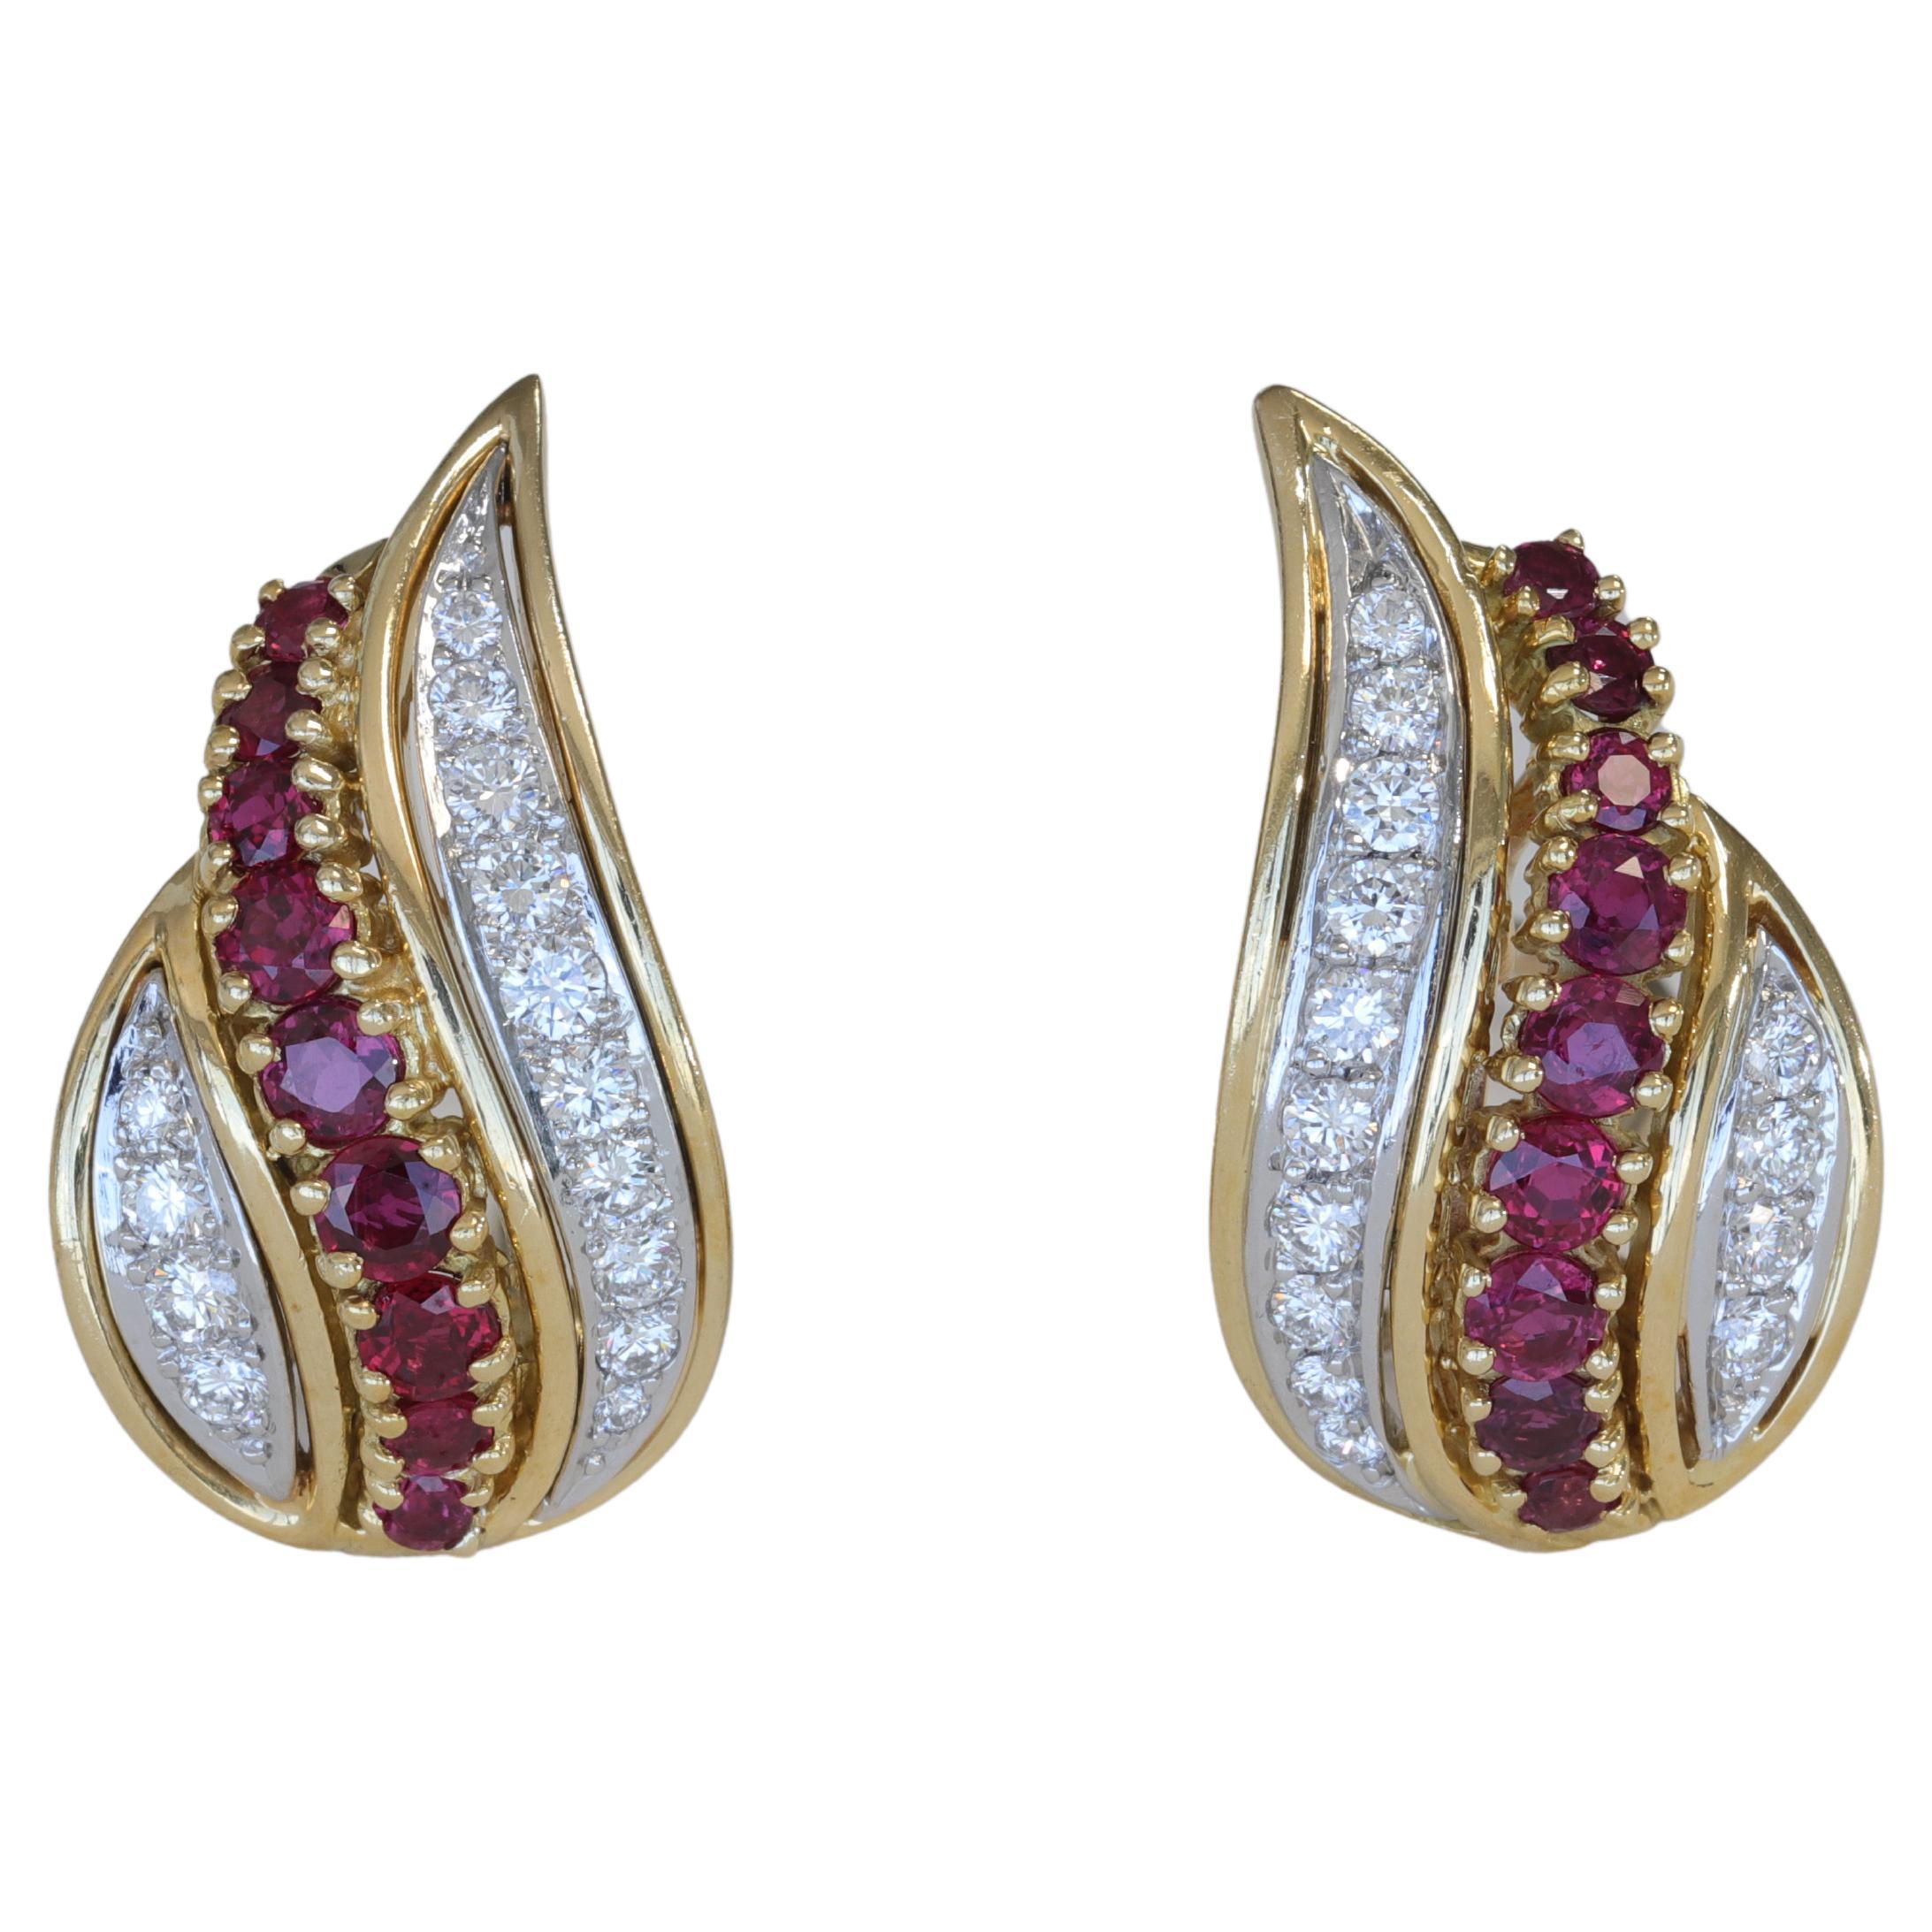 Tiffany & Co. Diamond and Ruby Paisley Motif Earrings in 18 Karat and Platinum